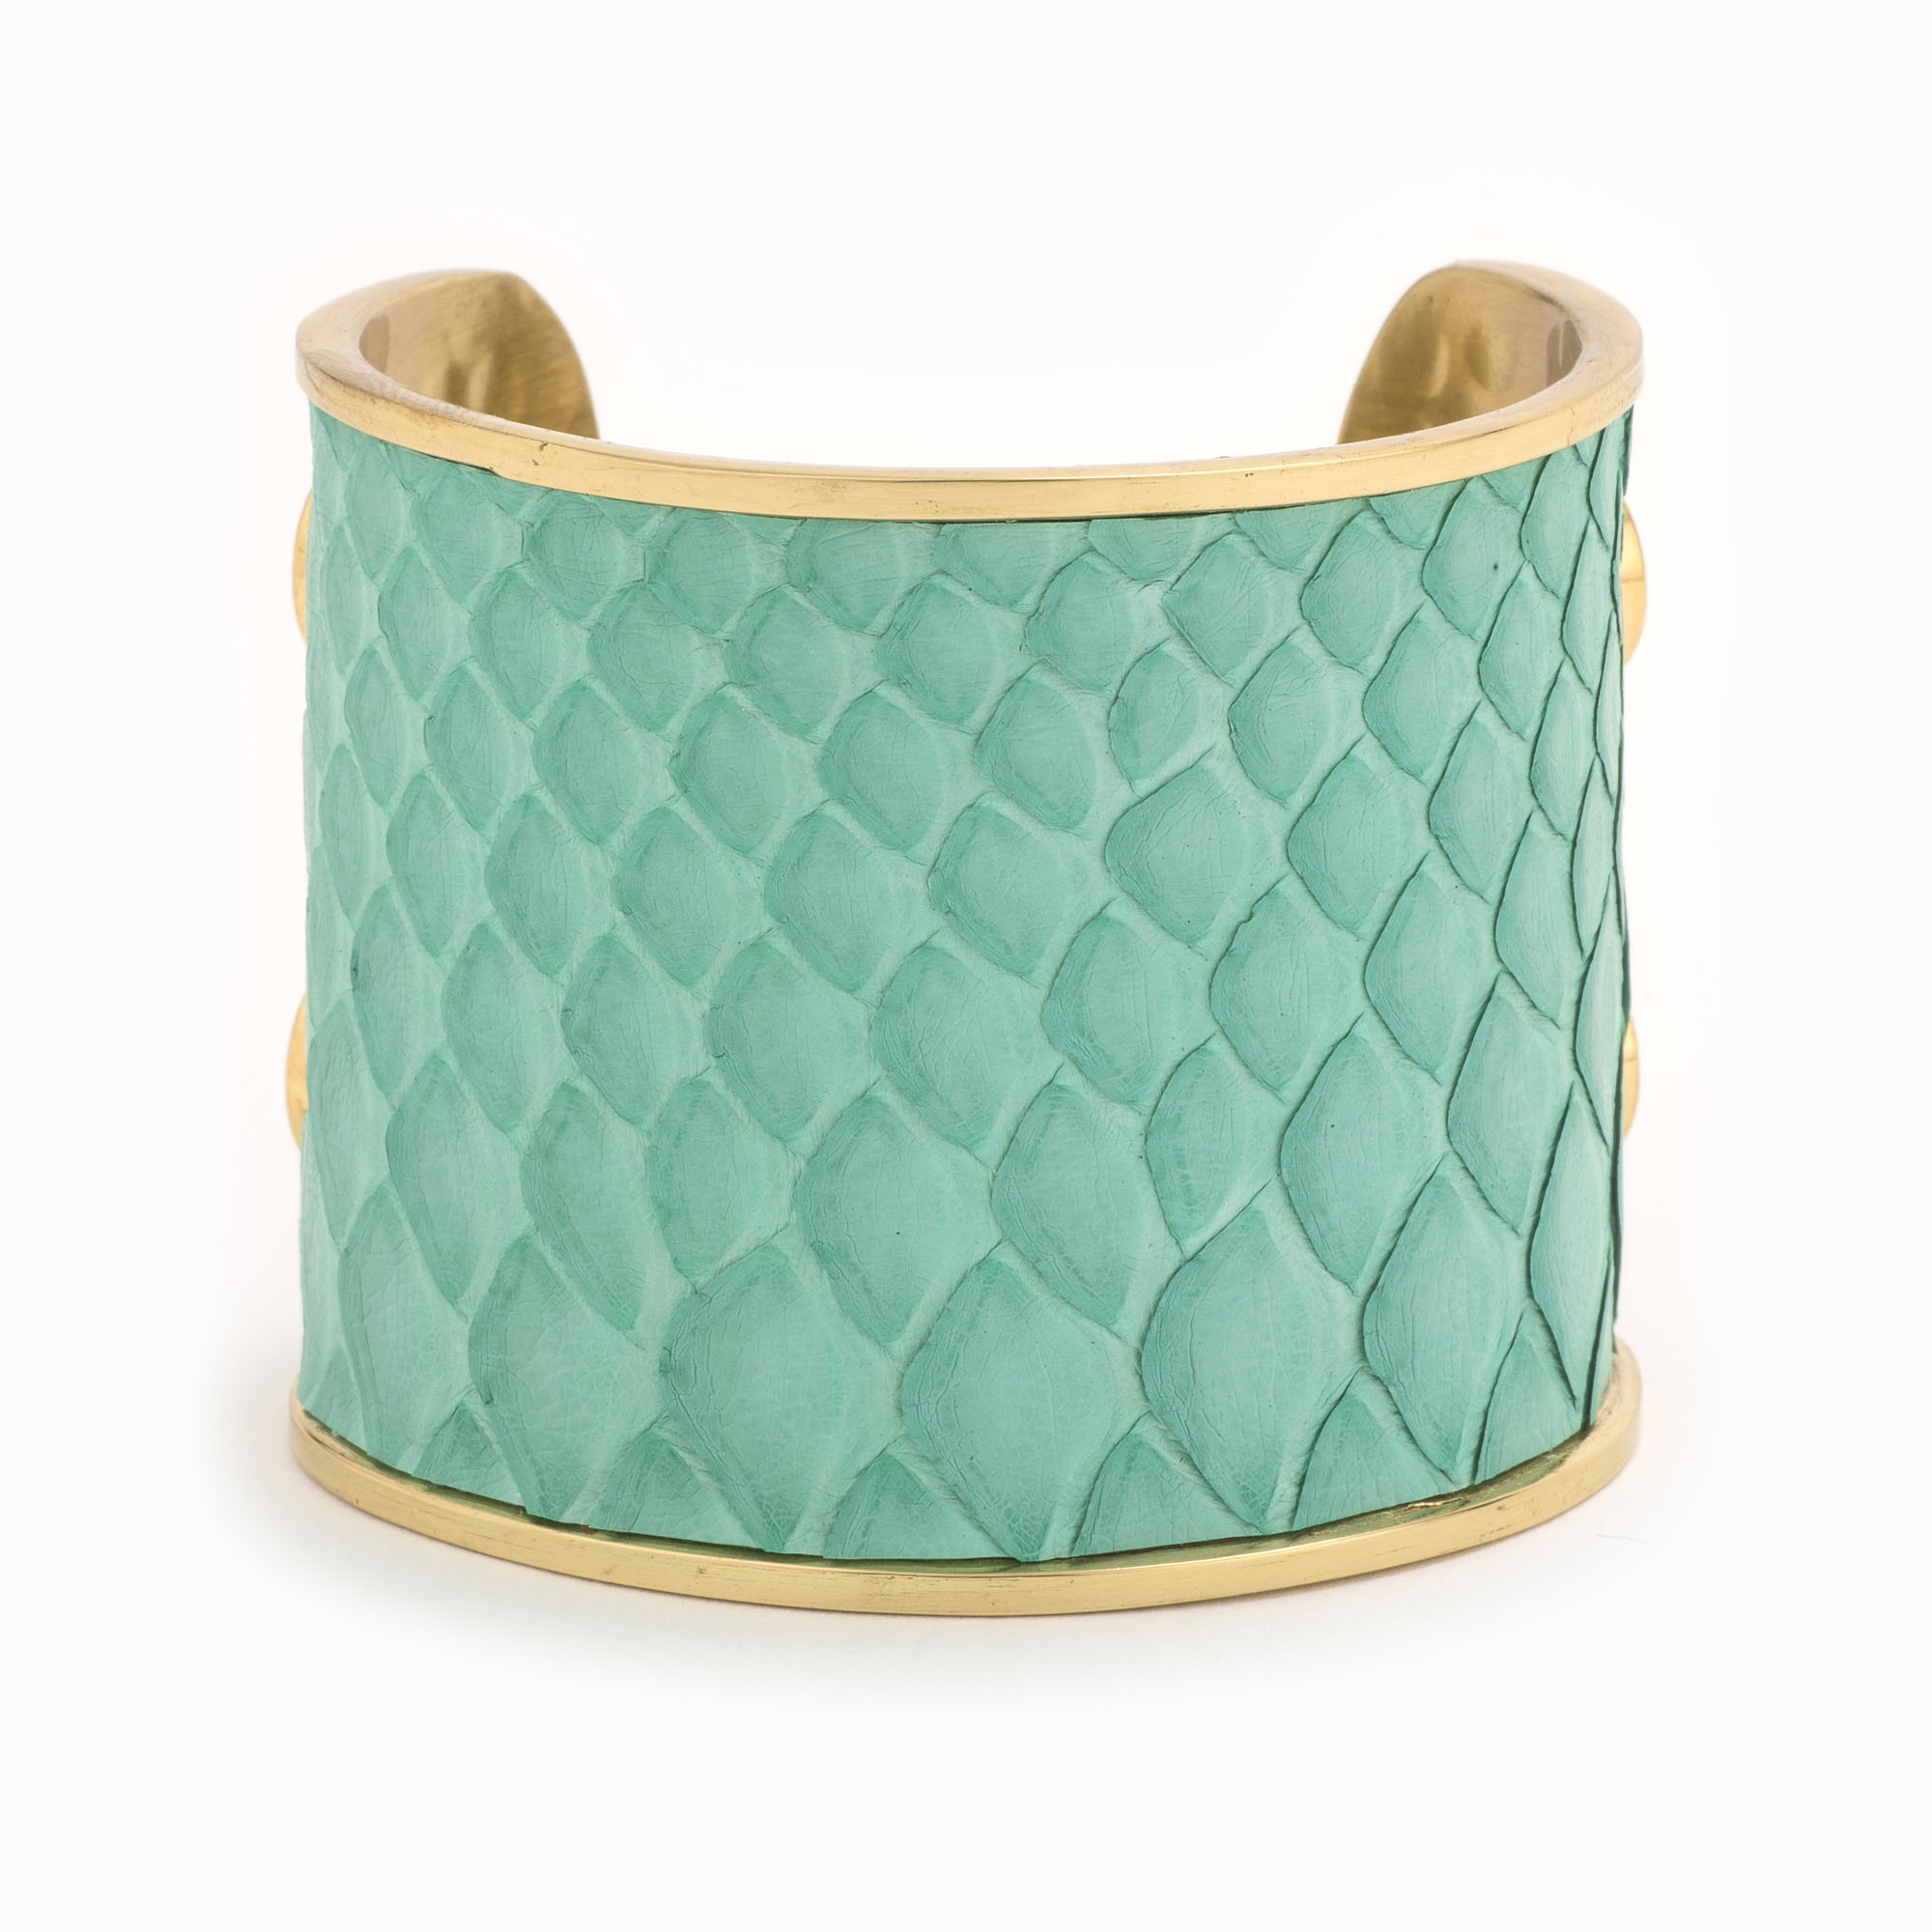 Featured image for “Large Turquoise Gold Cuff”